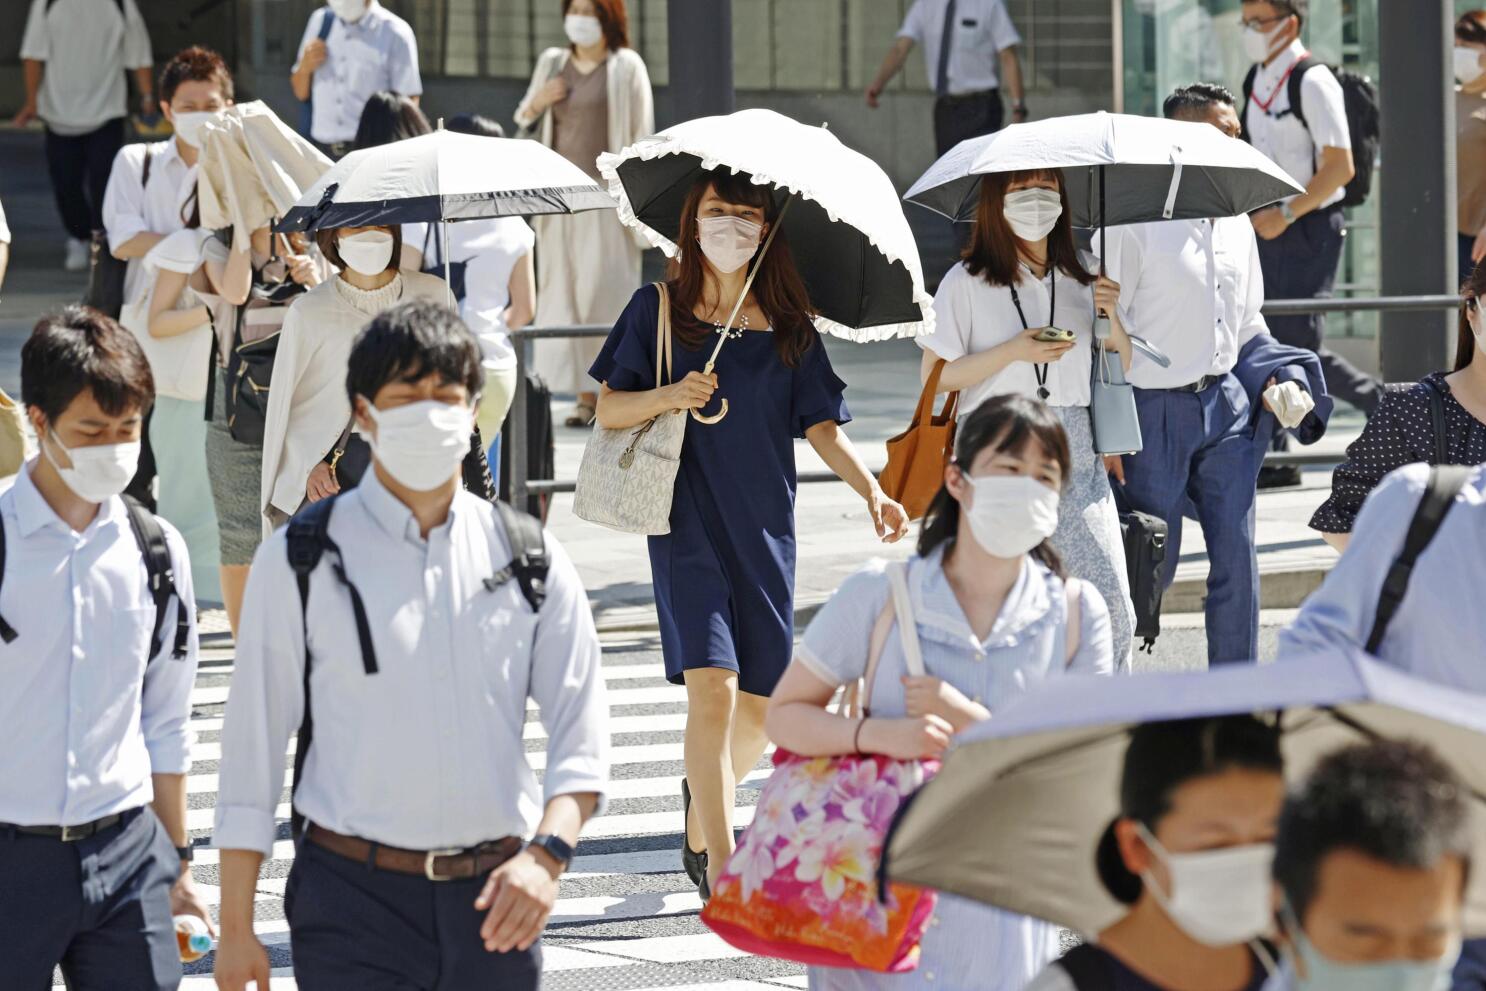 Tokyo records lowest temperature in 48 years, prompting rare